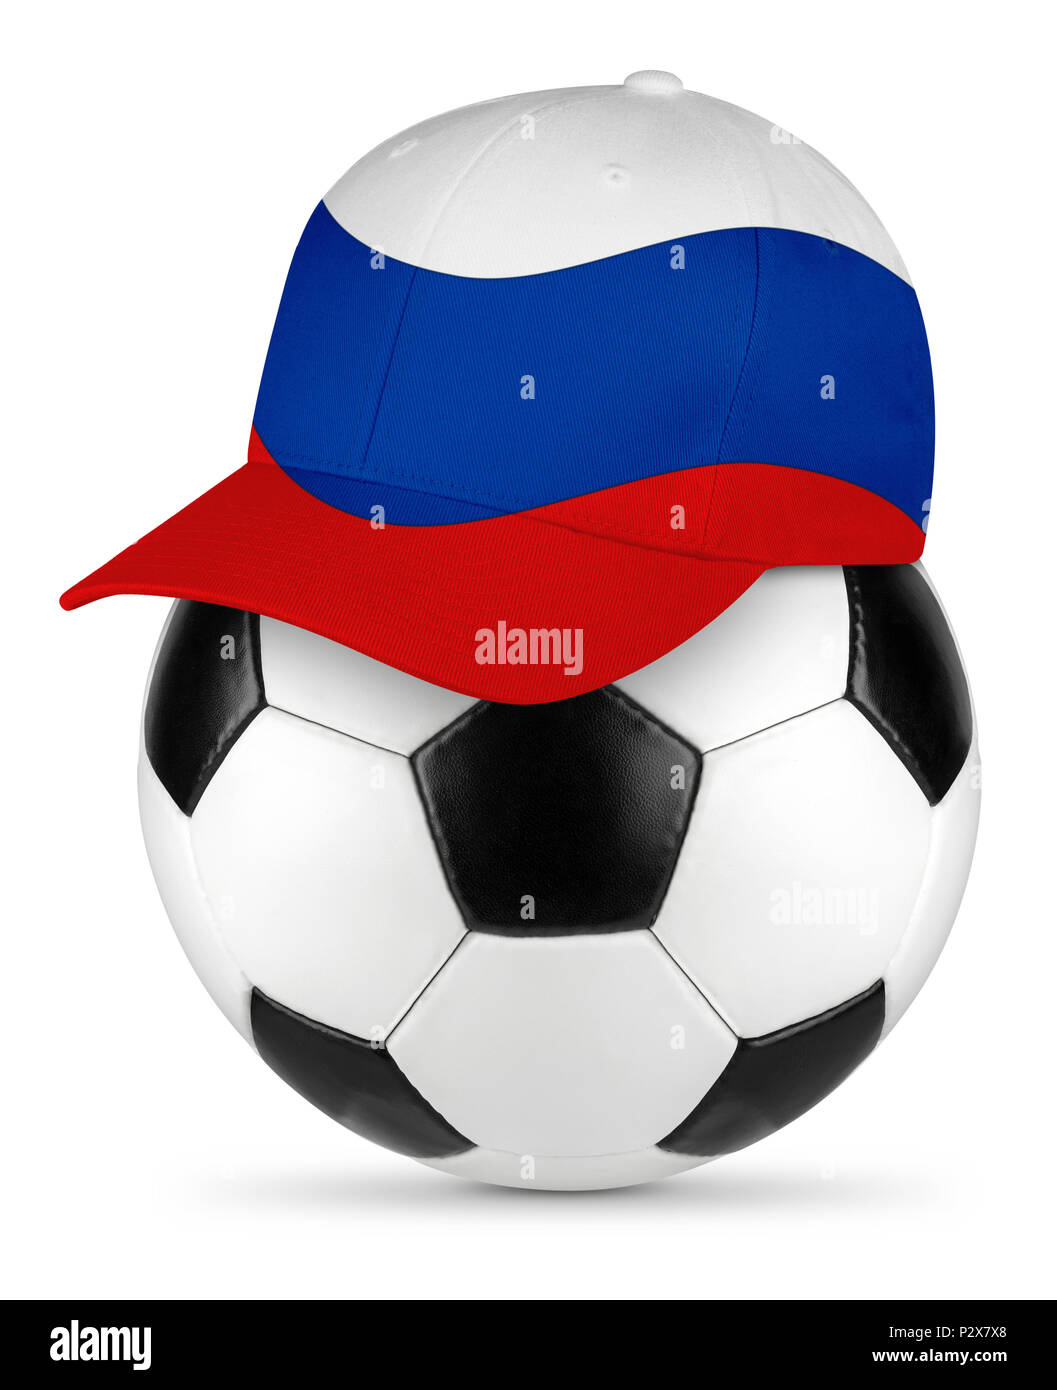 Classic black white leather soccer ball with russia russian baseball fan cap isolated background sport football concept Stock Photo